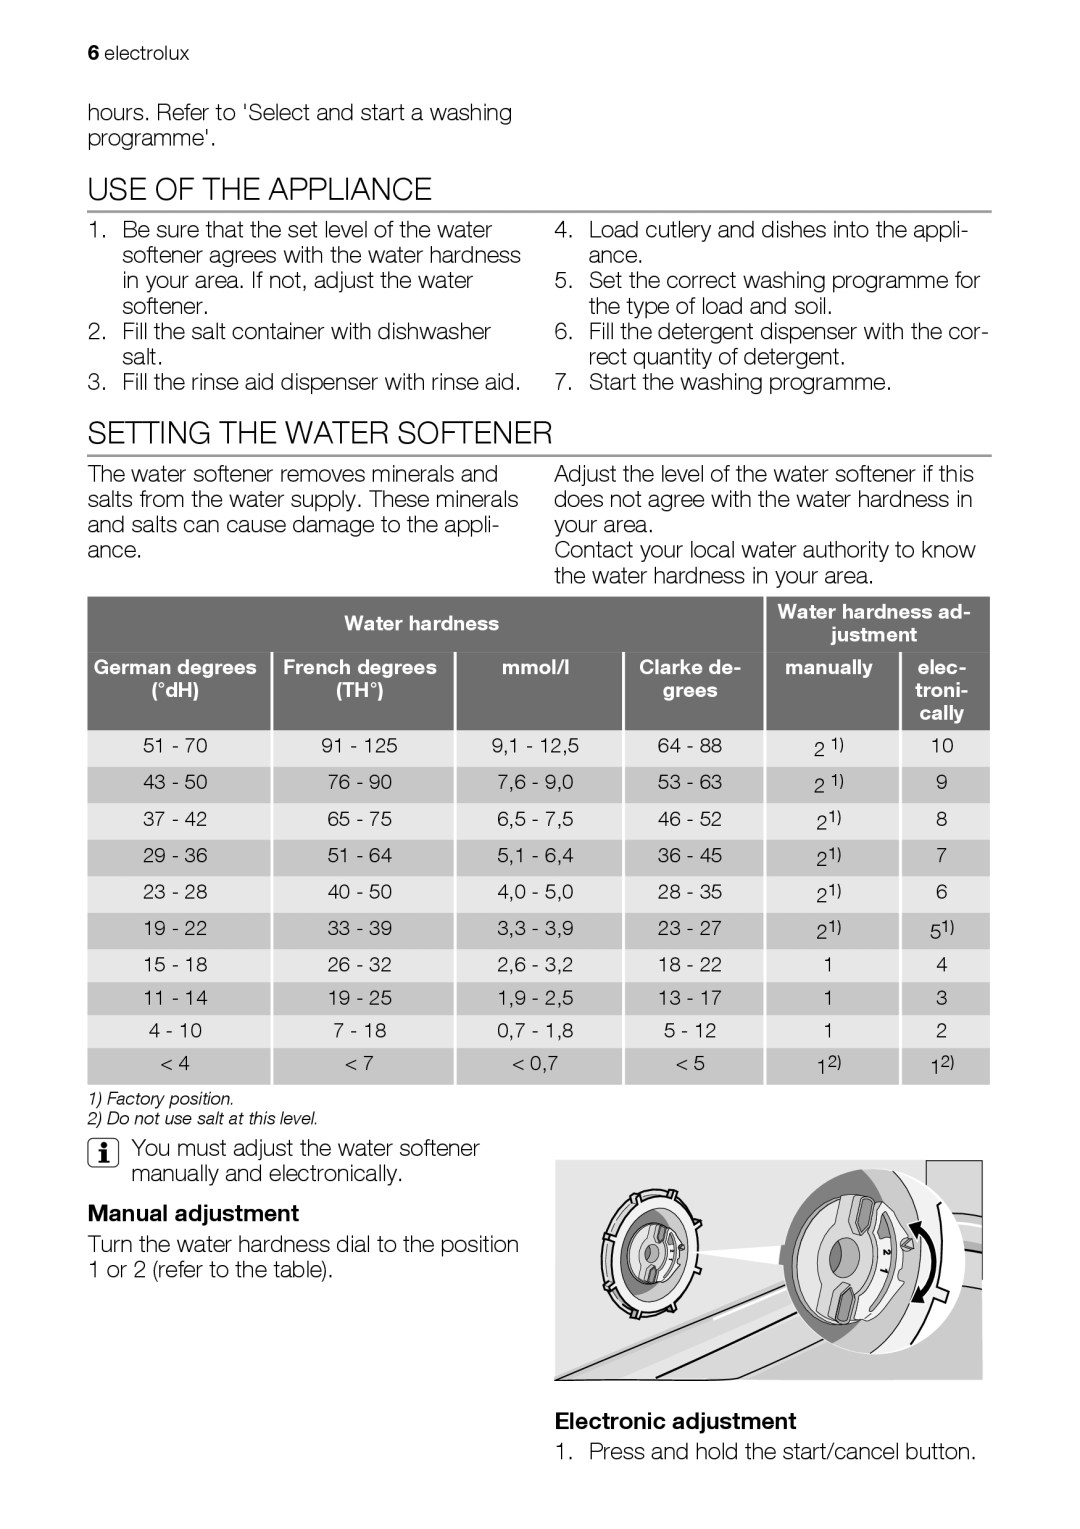 Electrolux ESF63012 user manual Use Of The Appliance, Setting The Water Softener, Manual adjustment, Electronic adjustment 